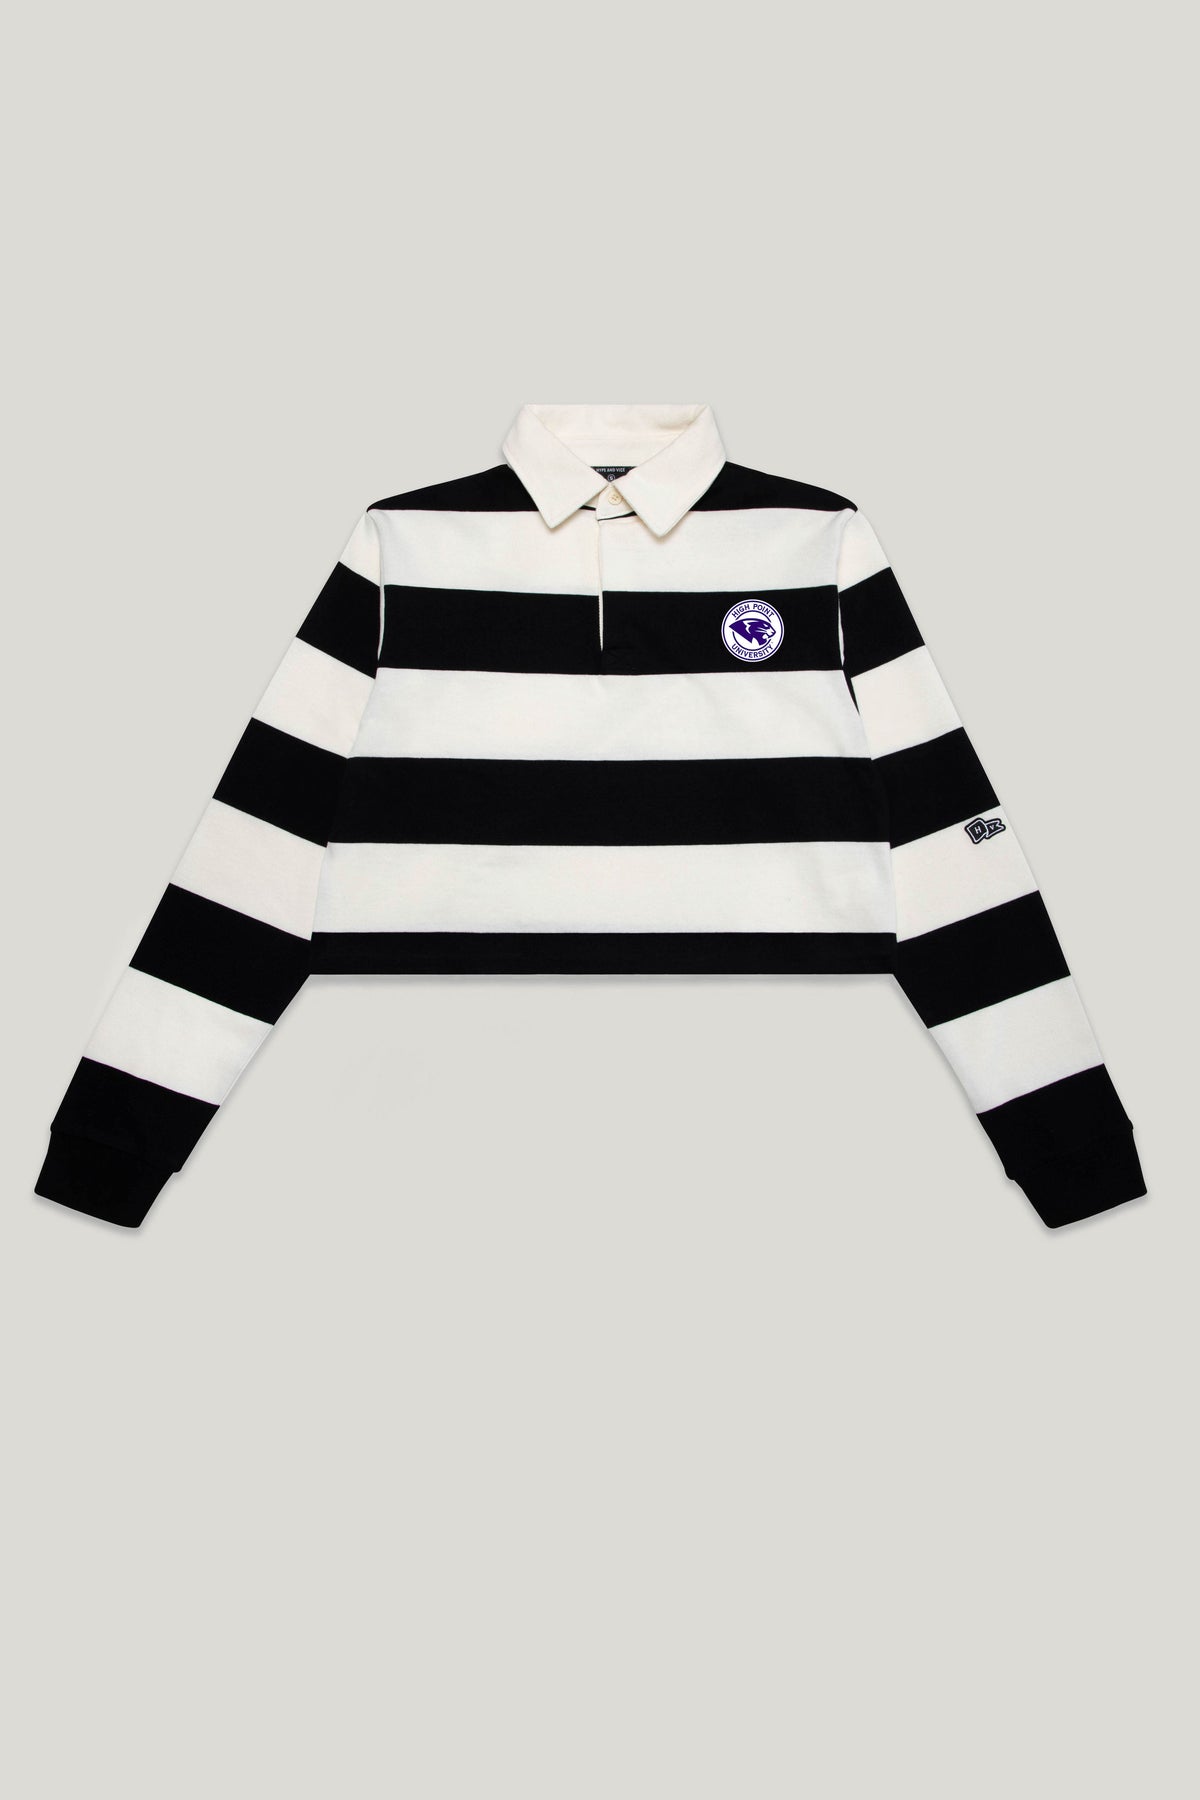 High Point University Rugby Top